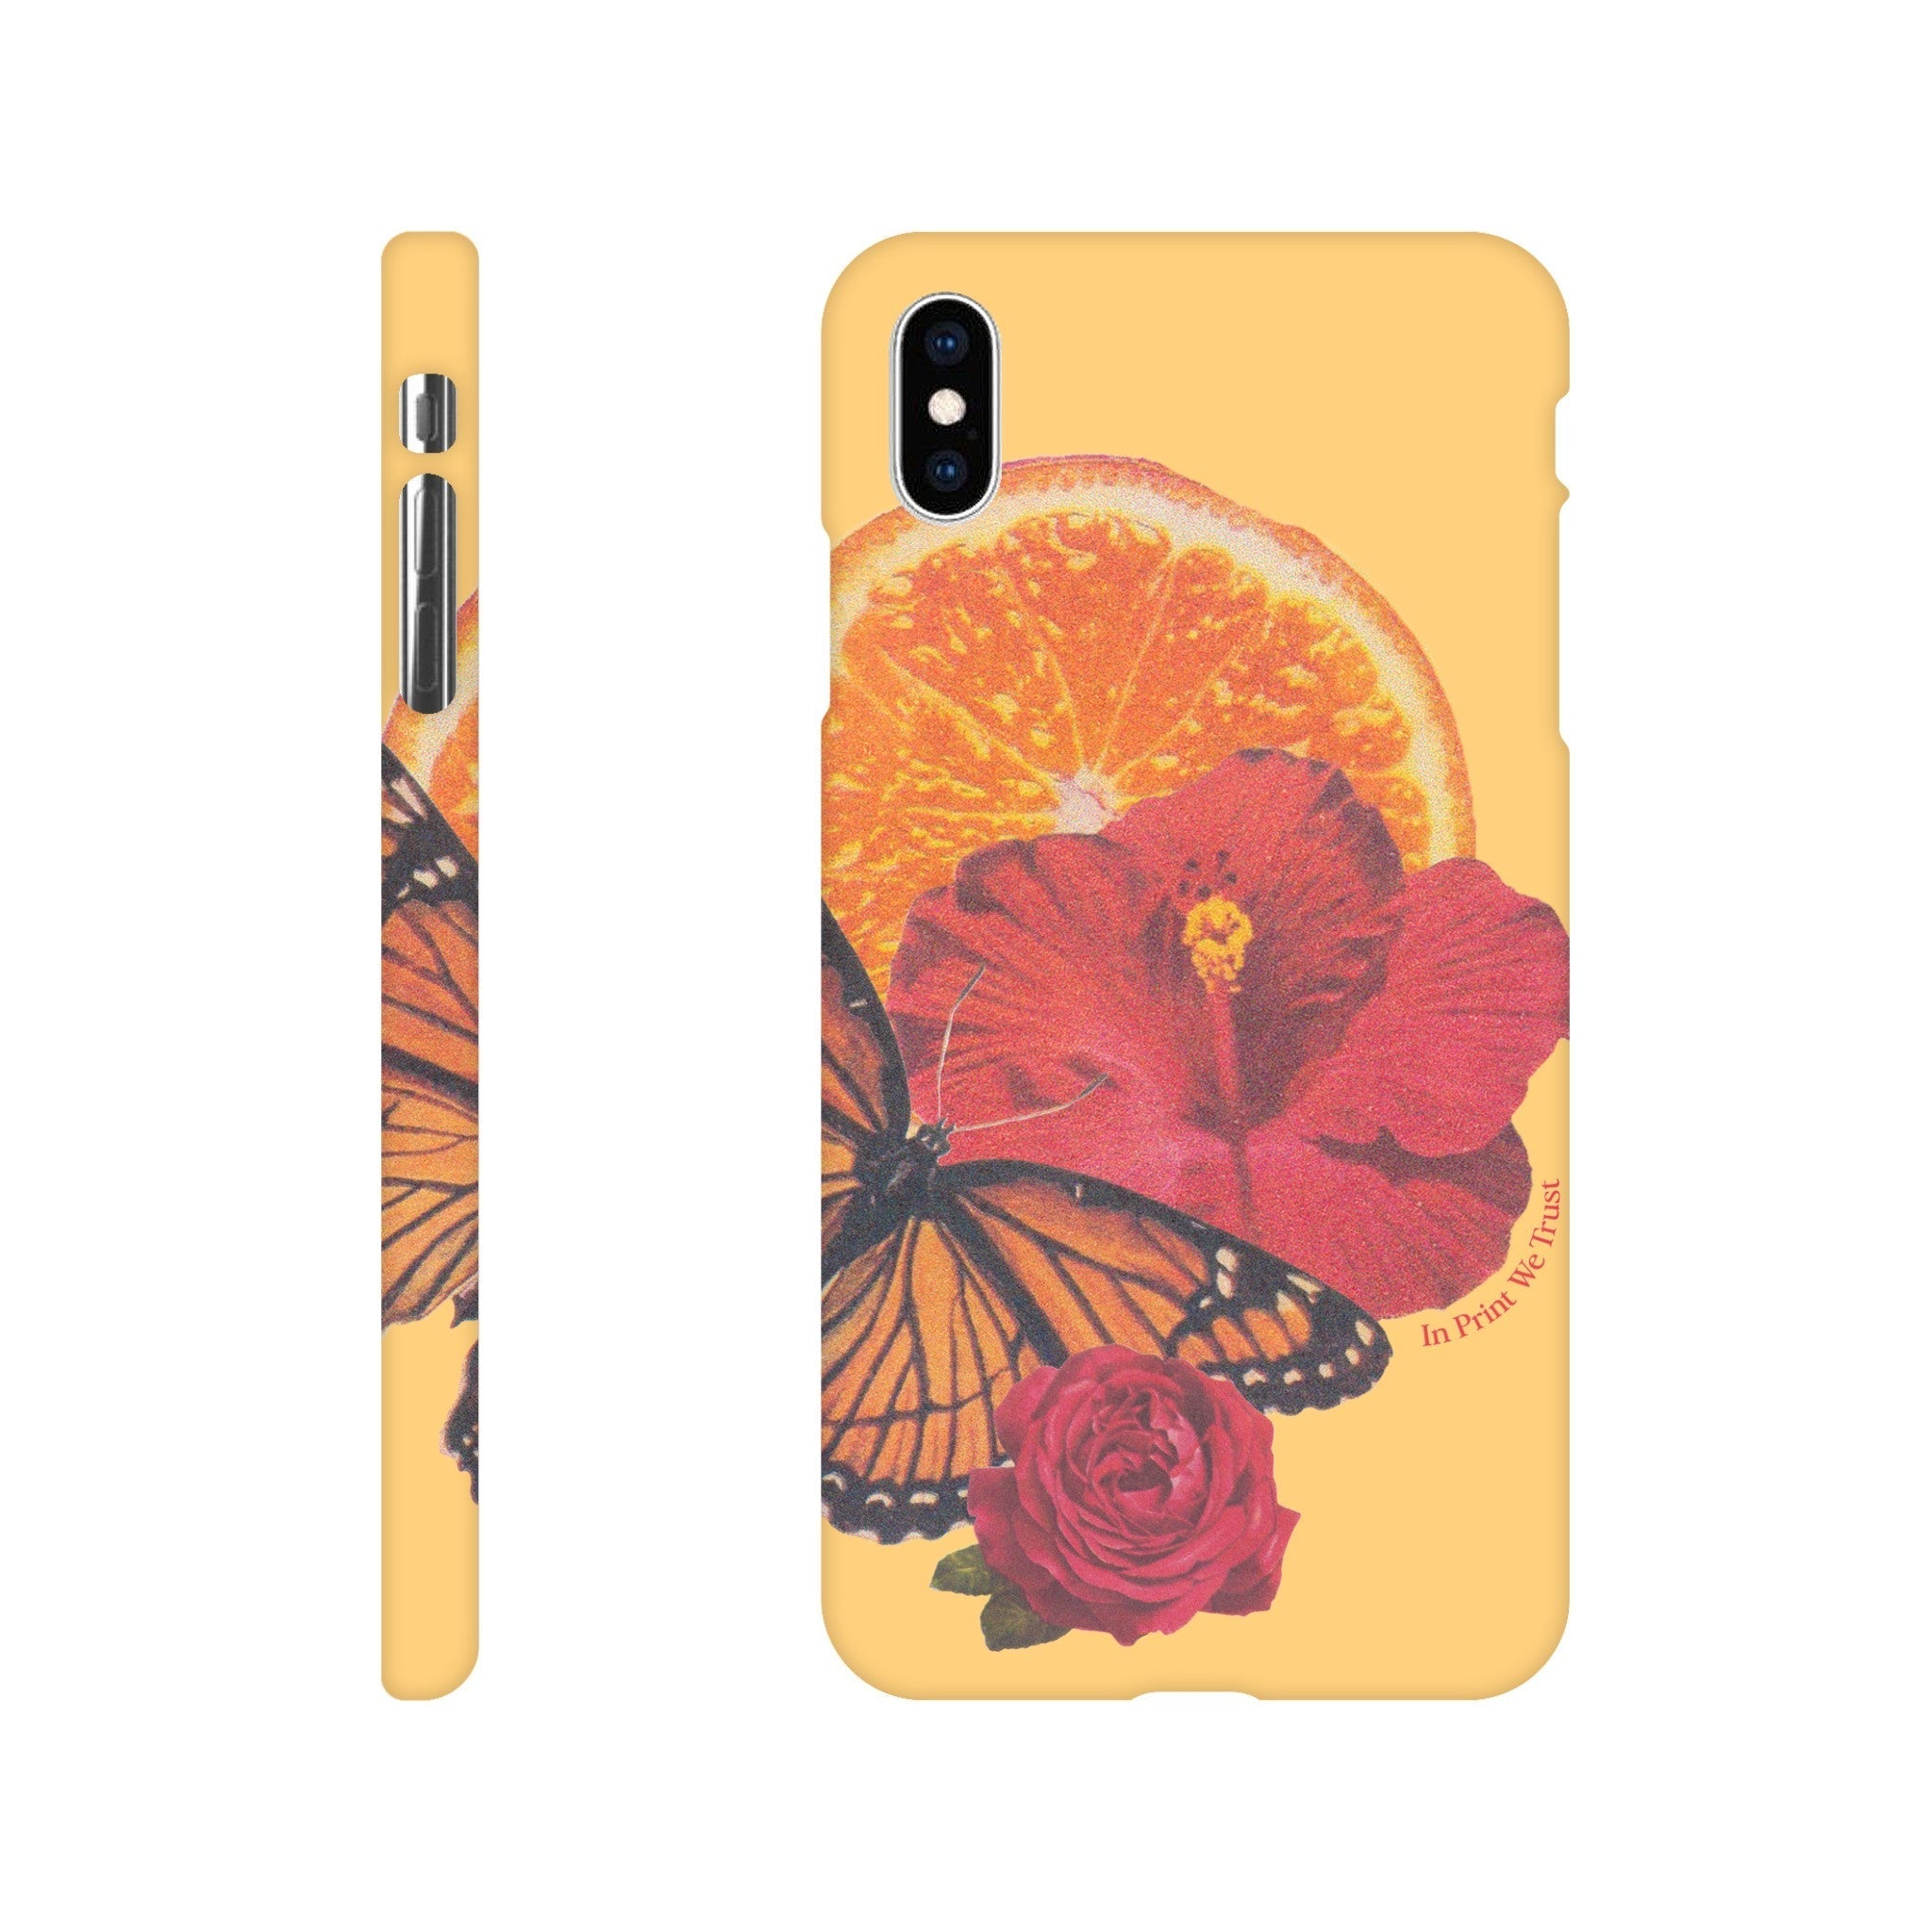 'Natural Beauty' phone case - In Print We Trust